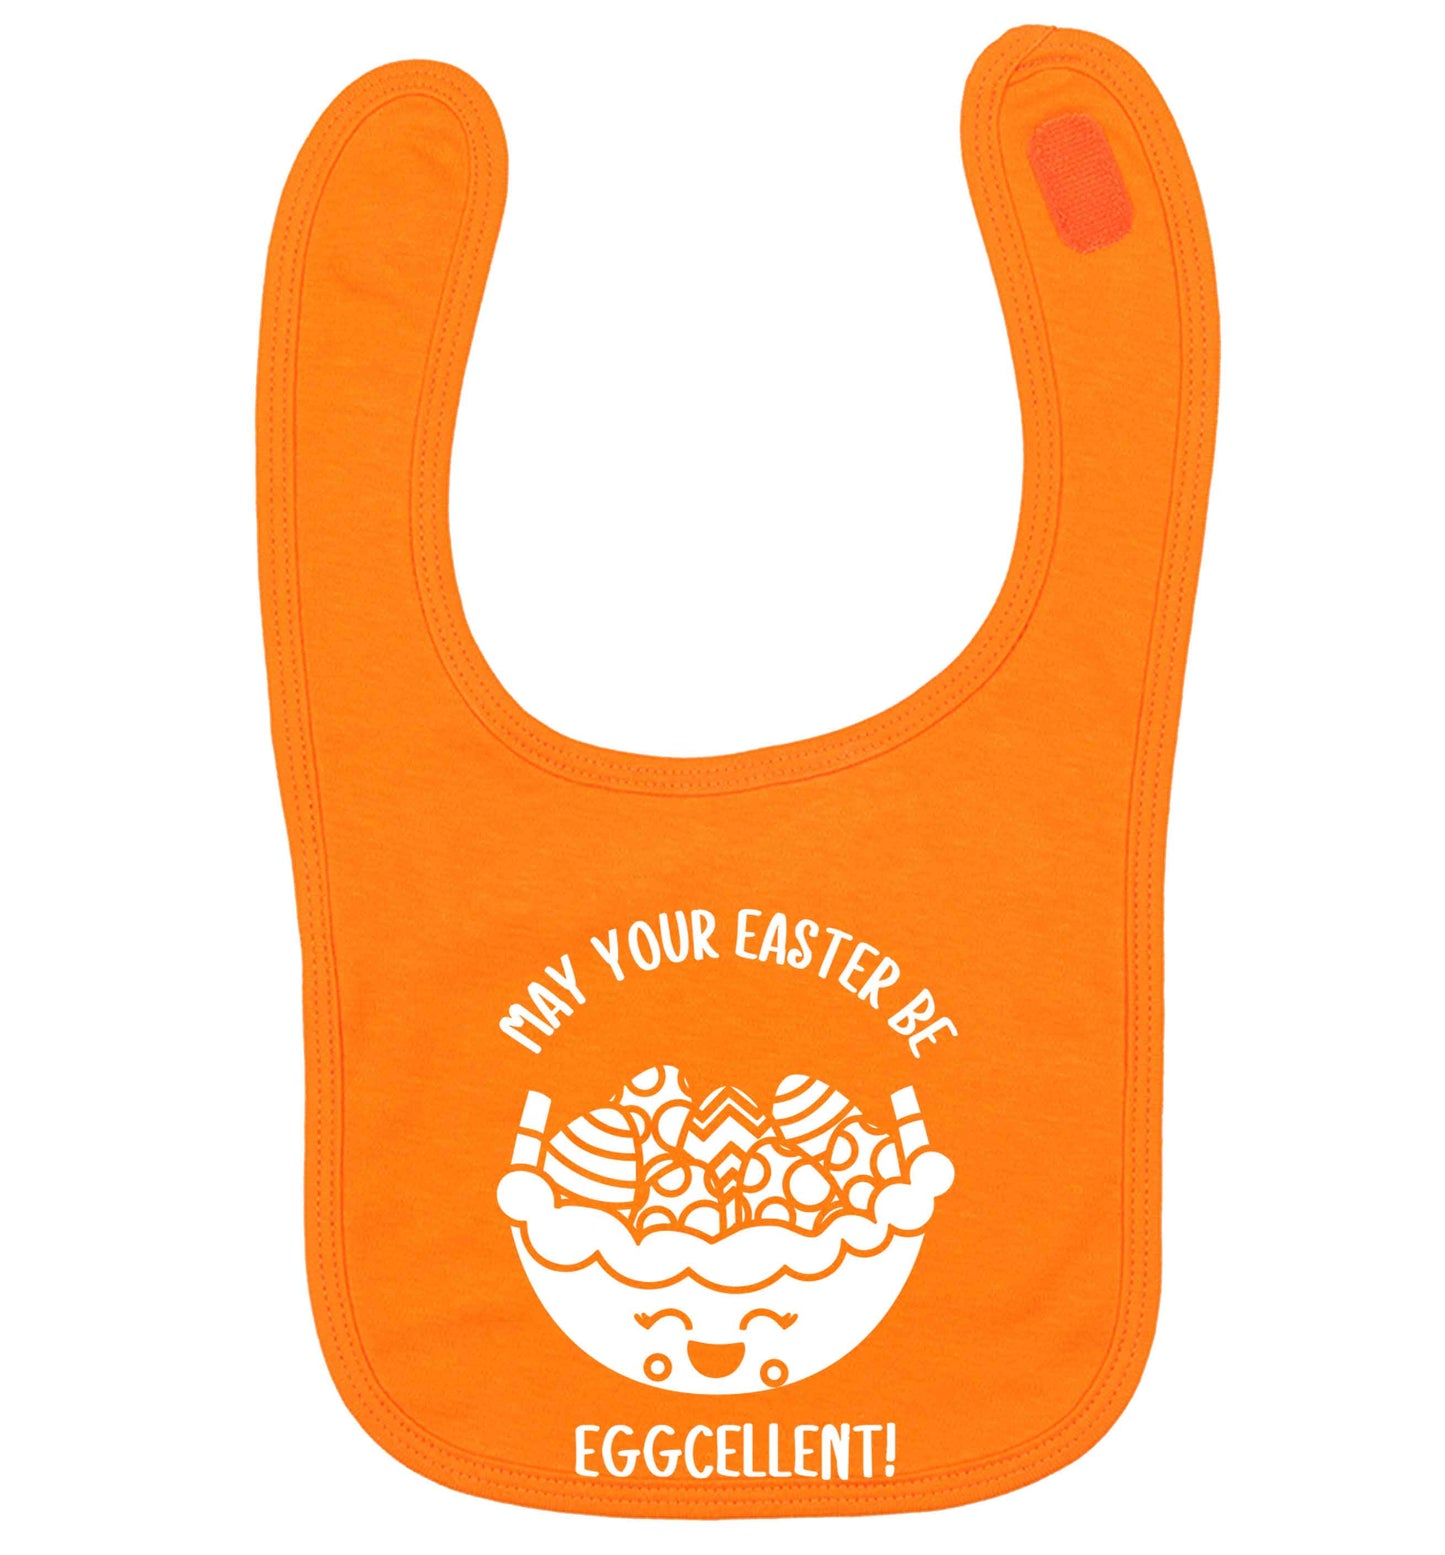 May your Easter be eggcellent orange baby bib